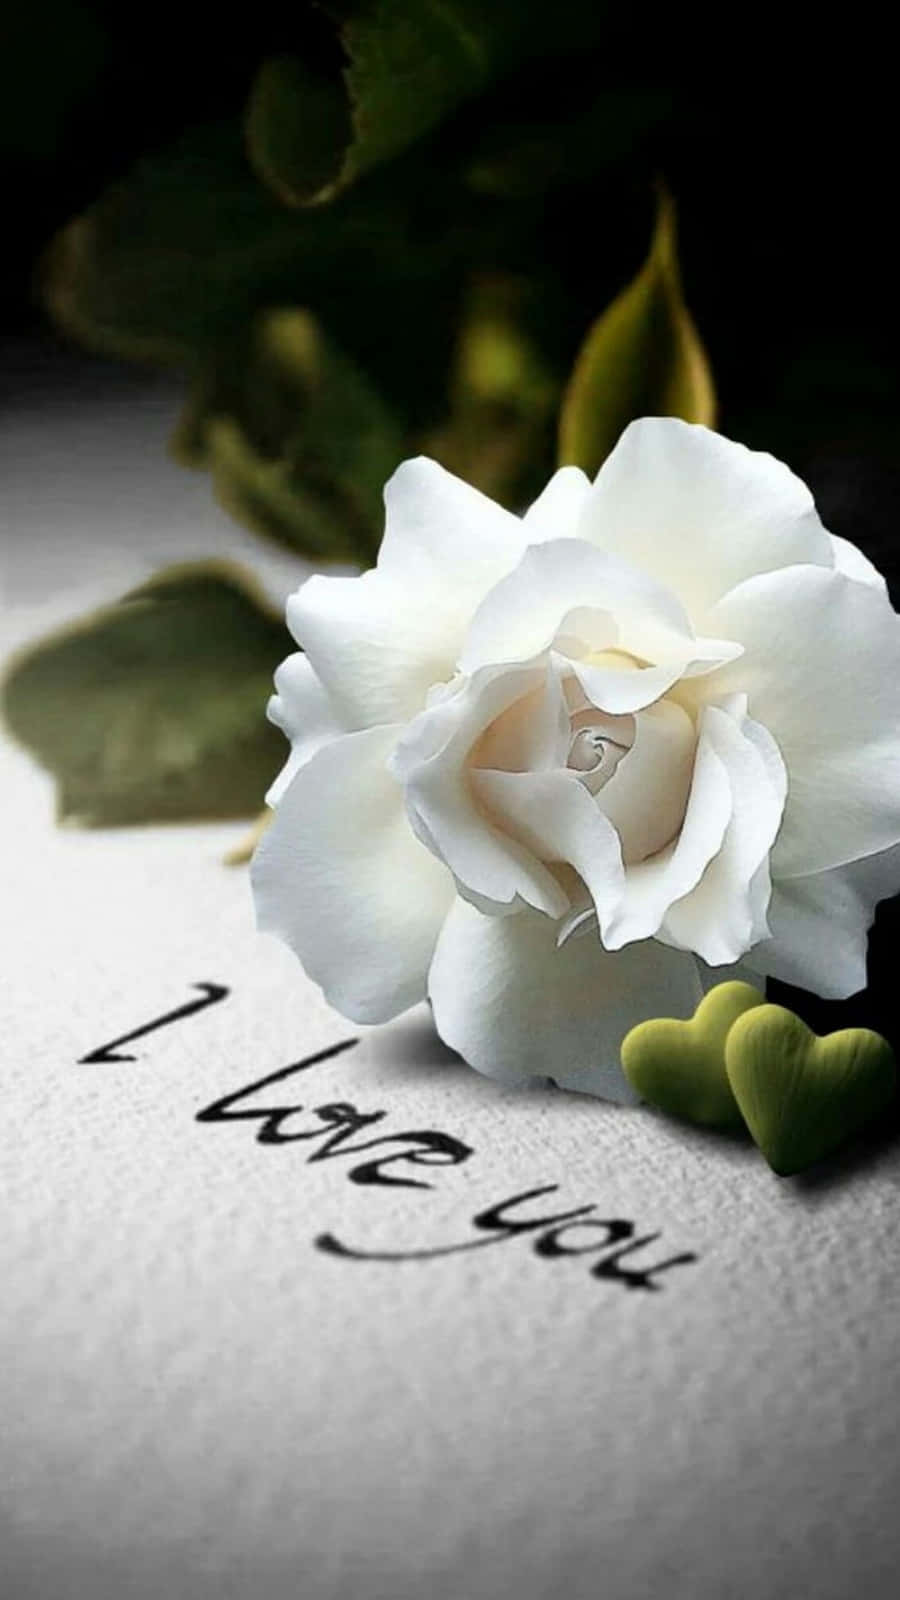 White Roses Iphone I Love You Wallpaper